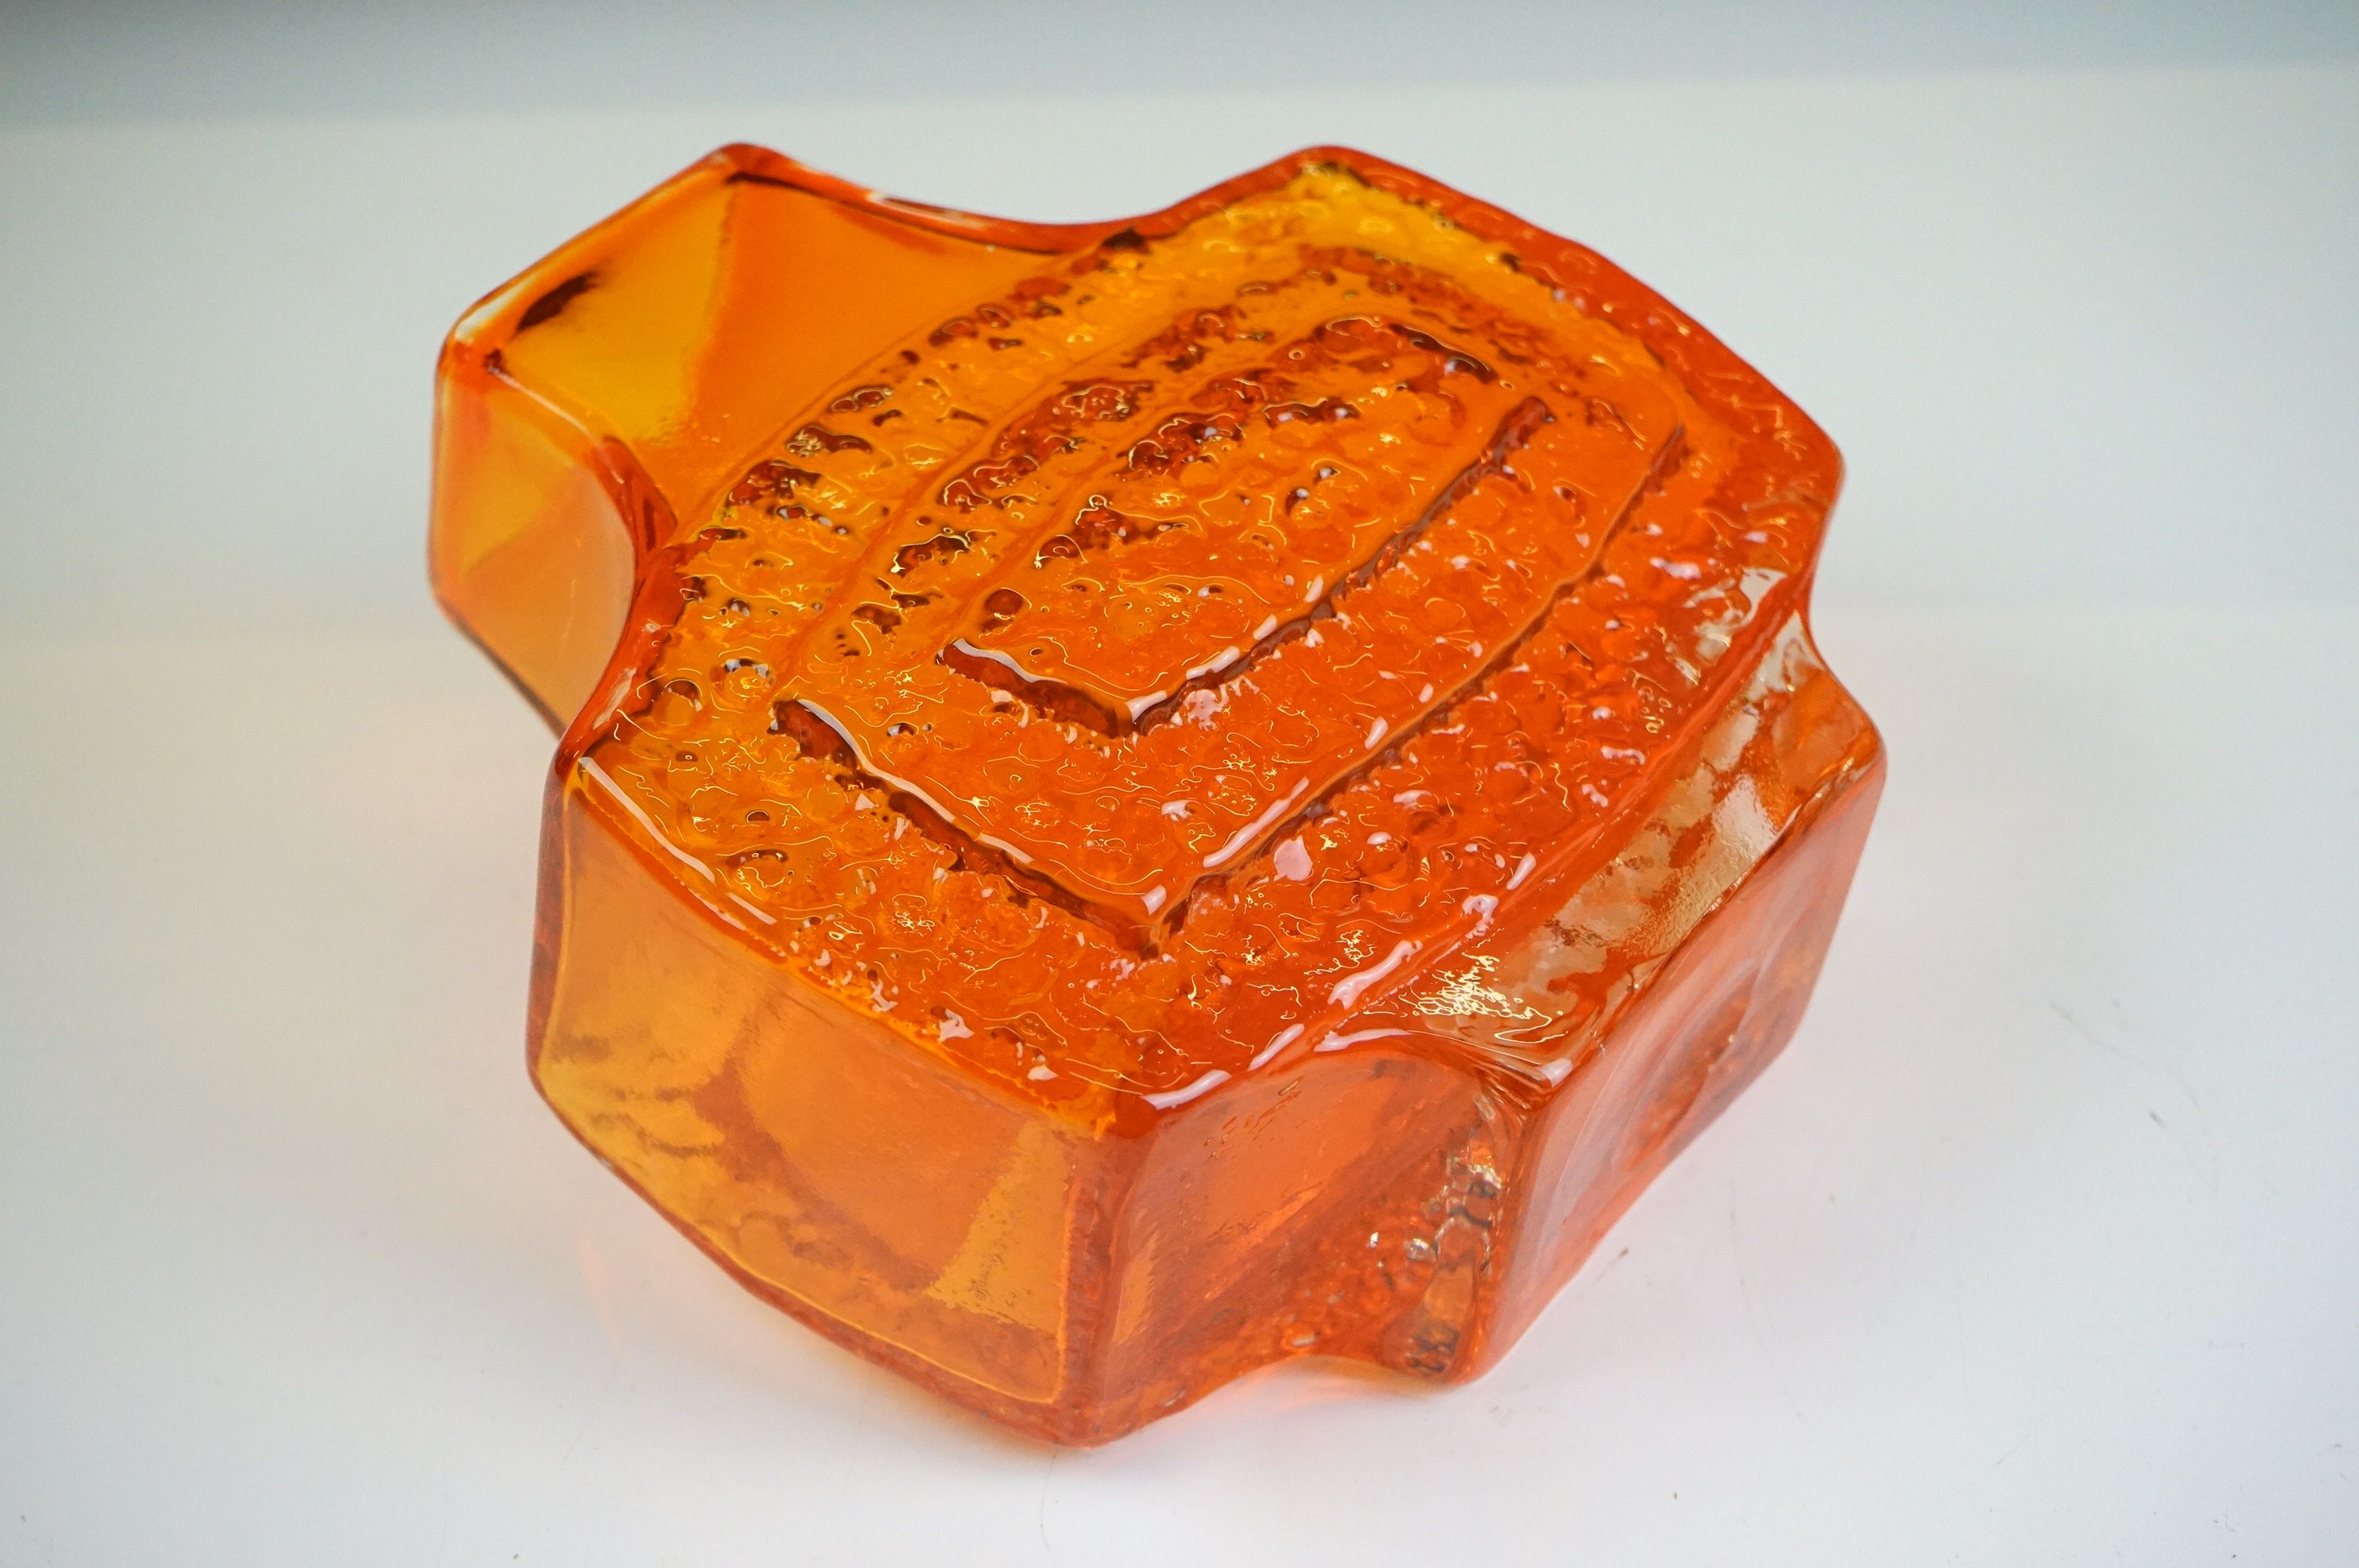 Whitefriars Textured Glass Concentric ' TV ' Pattern Vase, pattern no. 9677, in the Tangerine - Image 8 of 9